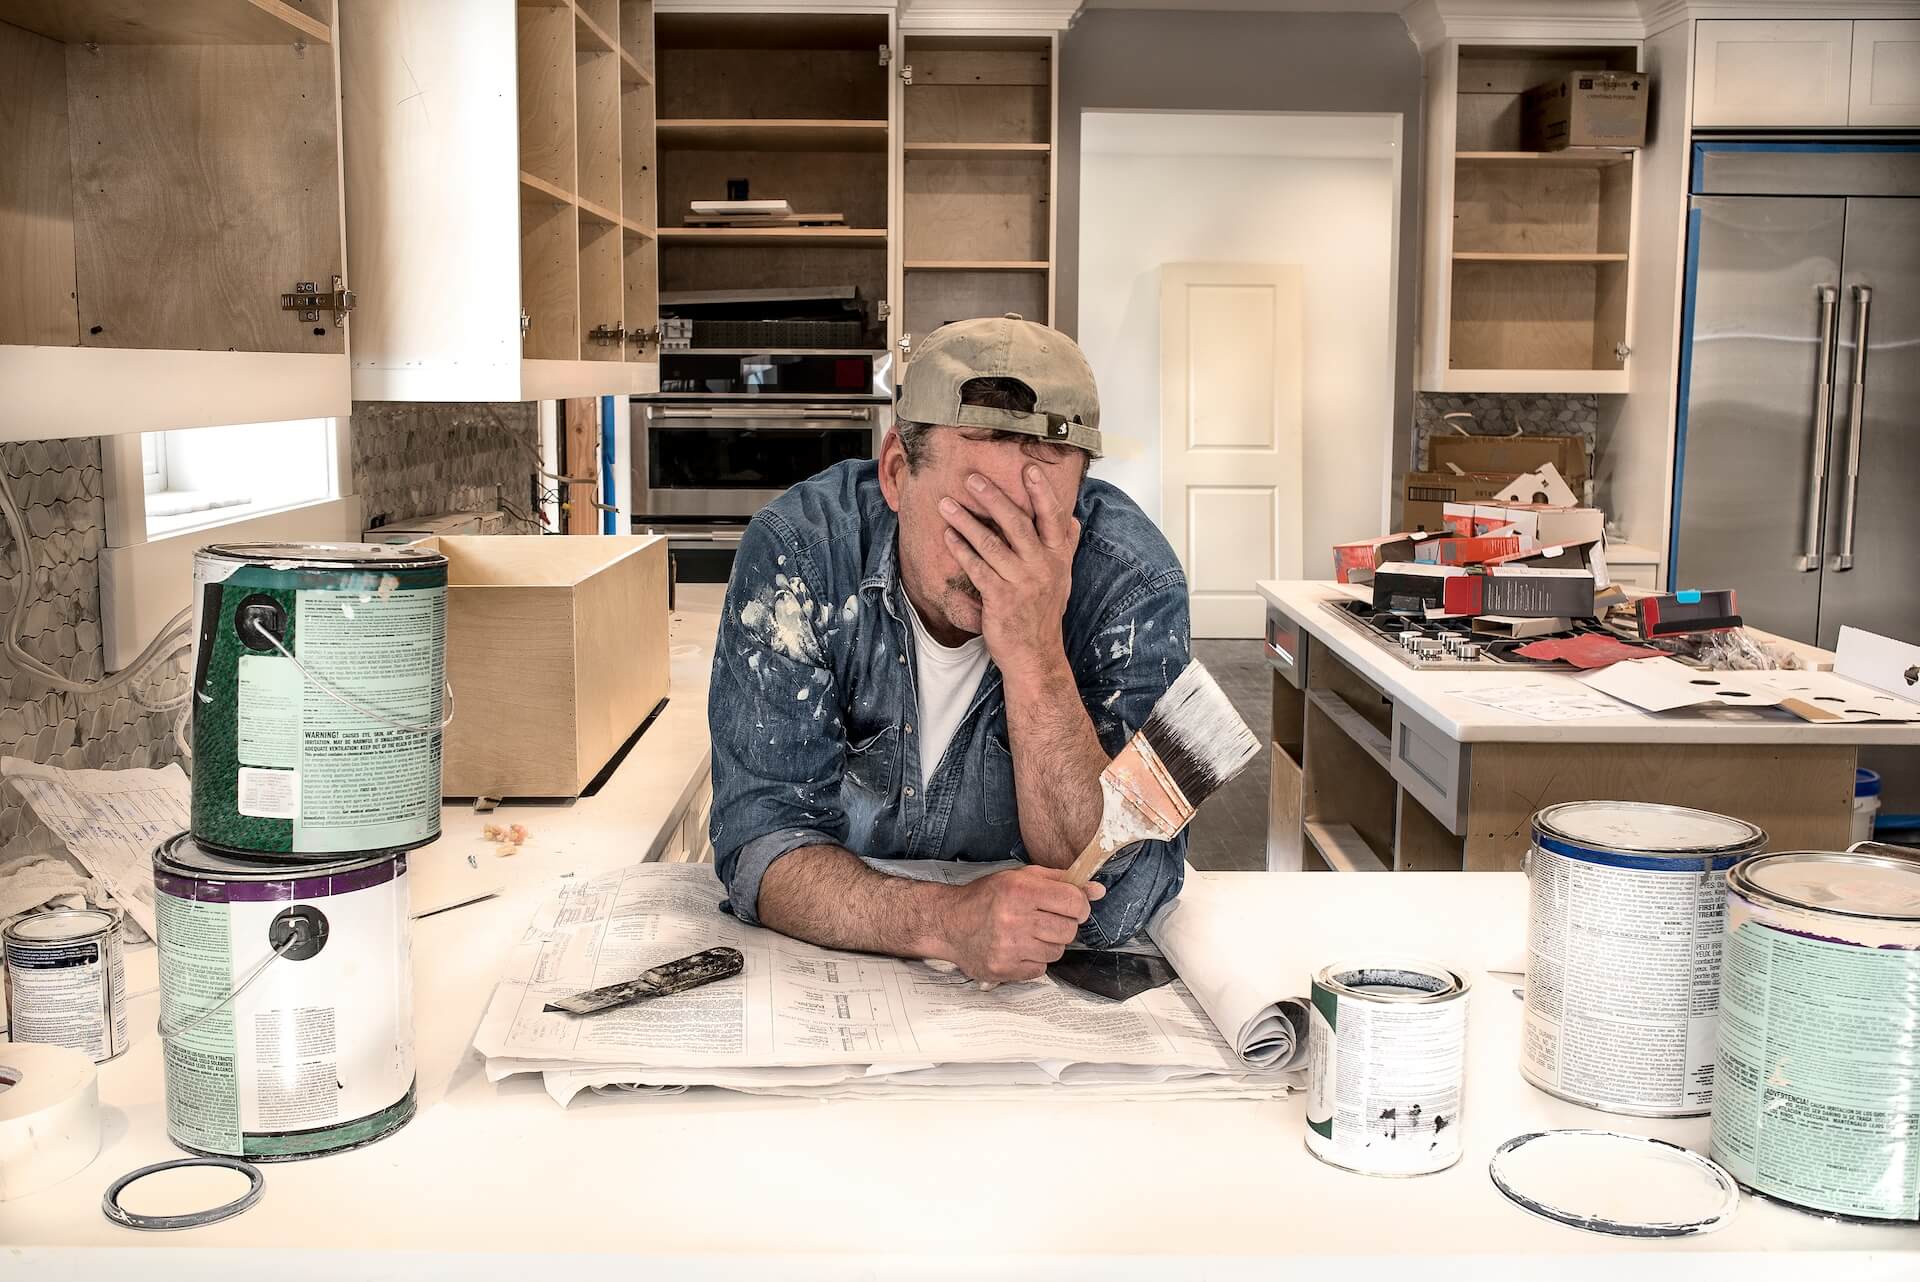 Man exhausted from remodeling mistakes in the kitchen.